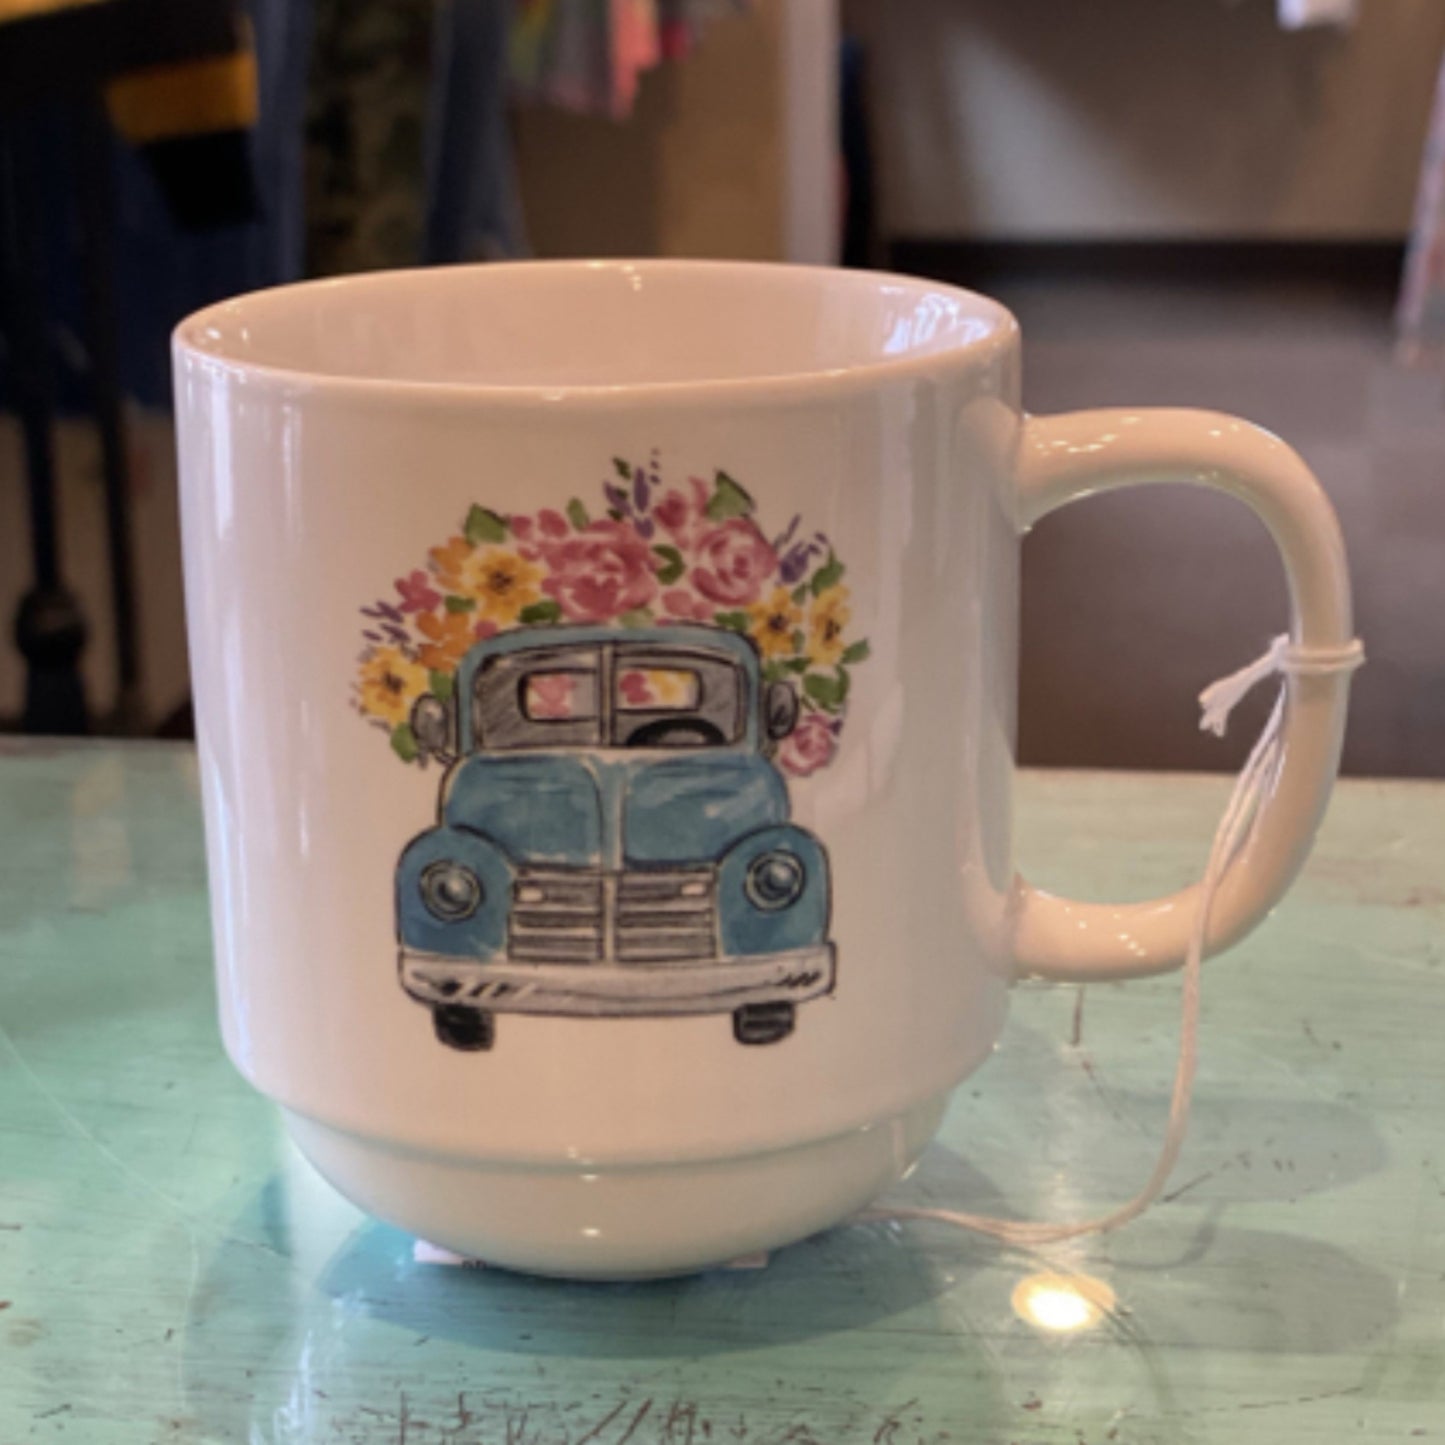 Old Truck w/Flowers in the Bed Coffee Mug